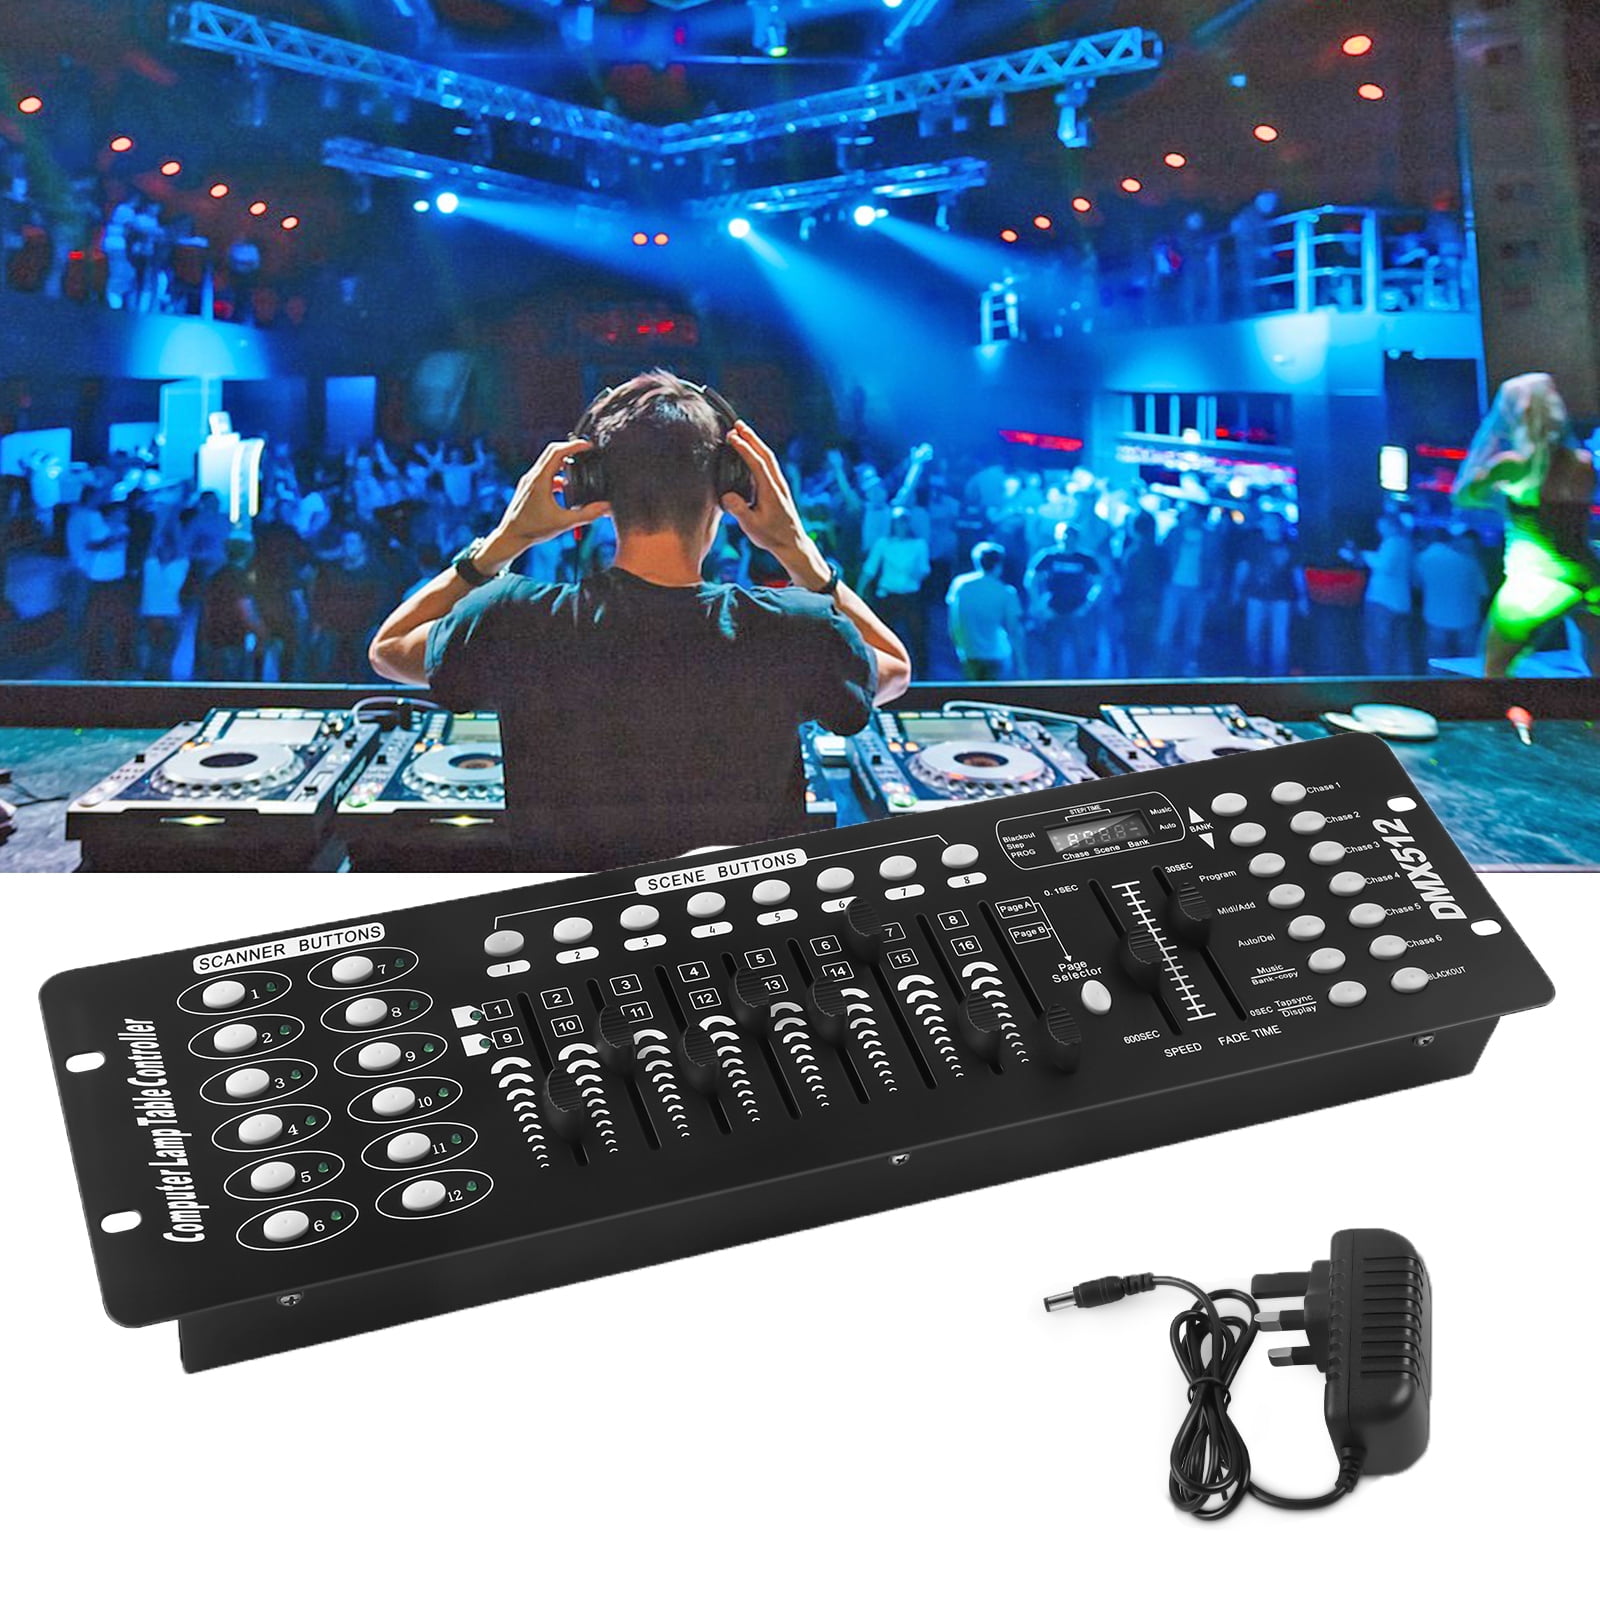  CO-Z 192 DMX 512 Stage DJ Light Controller Lighting Mixer Board  Console for Light Shows, Party Disco Pub Night Club DJs KTV Bars and Moving  Heads : Musical Instruments